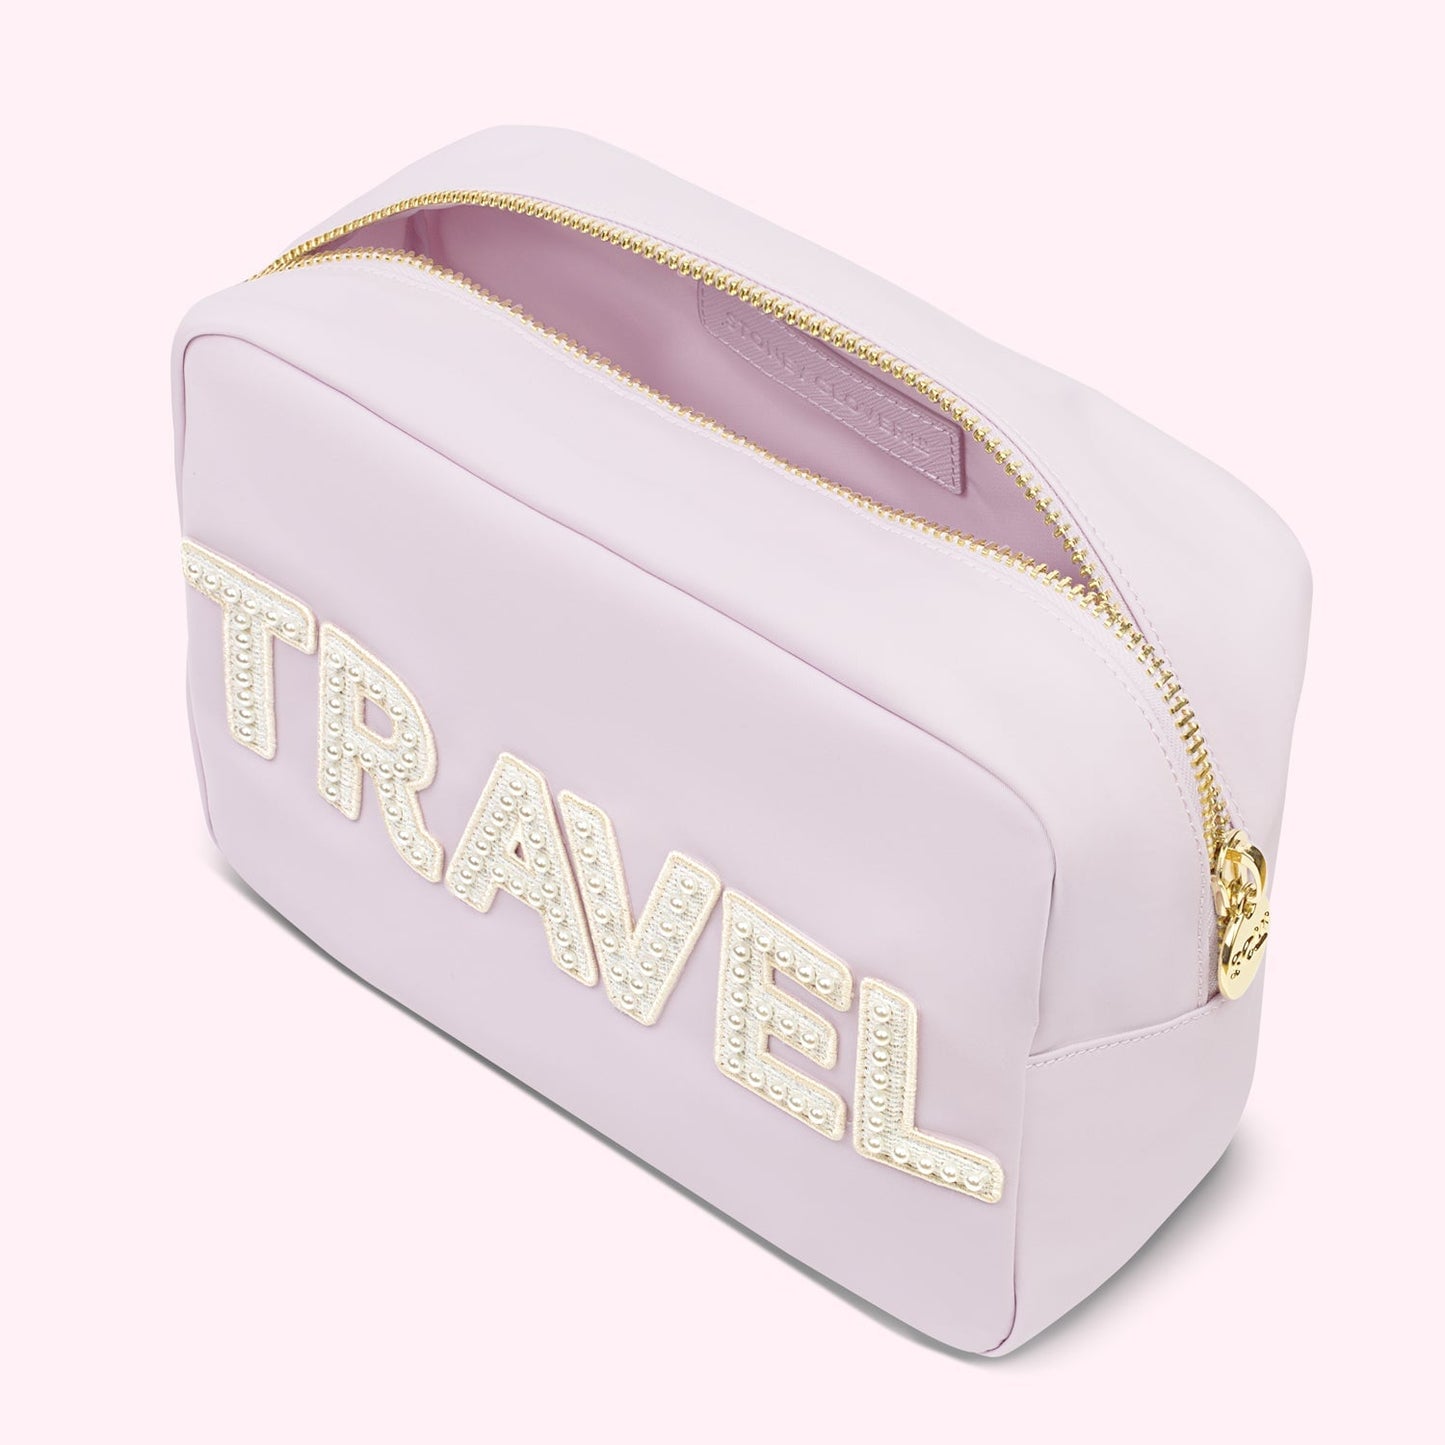 Lilac "Travel" Large Pouch